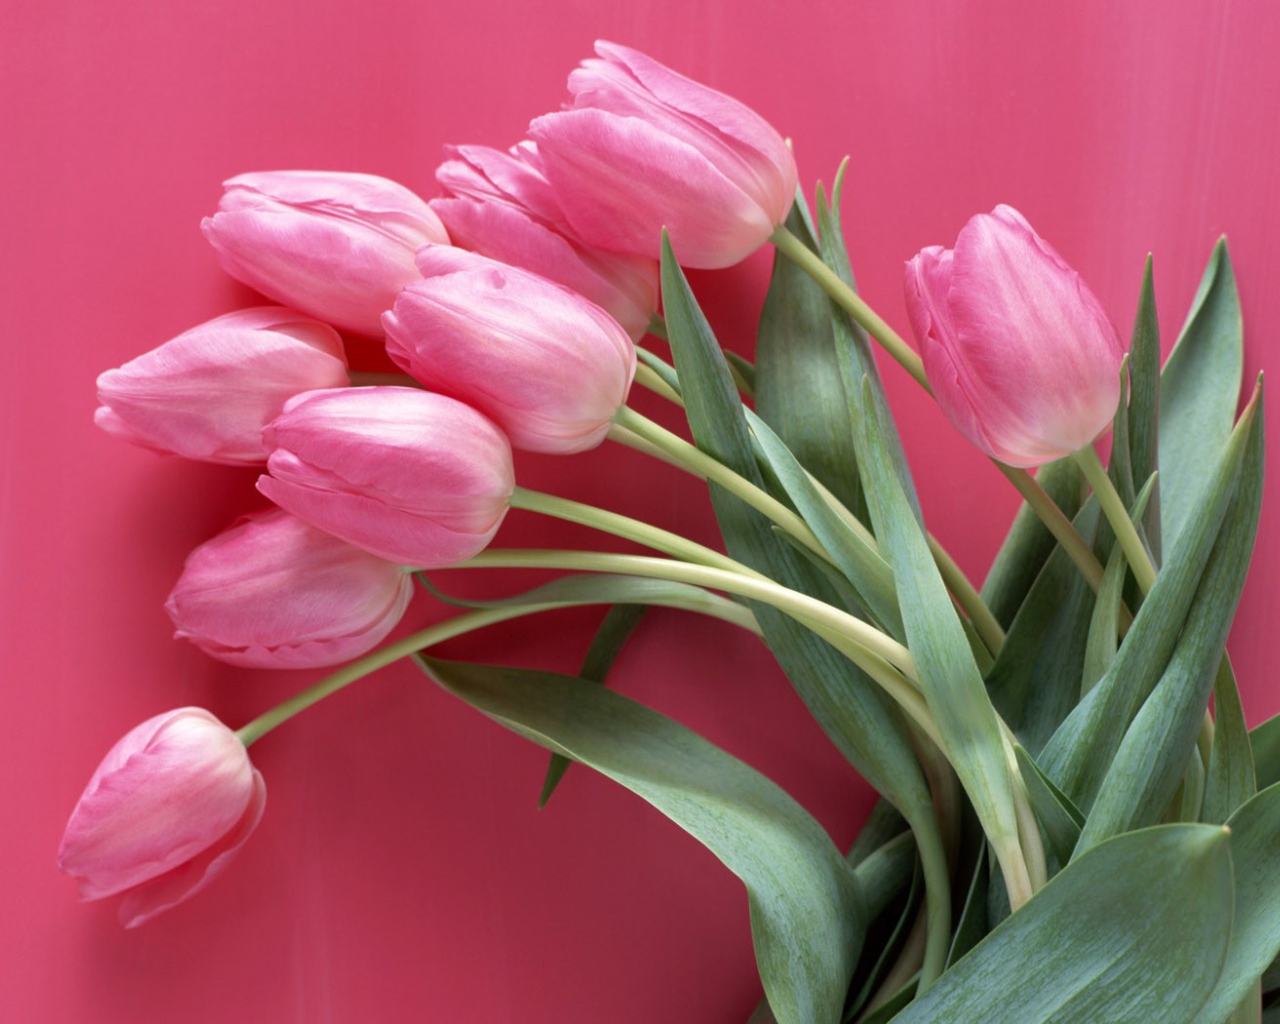 Tulips on a pink background